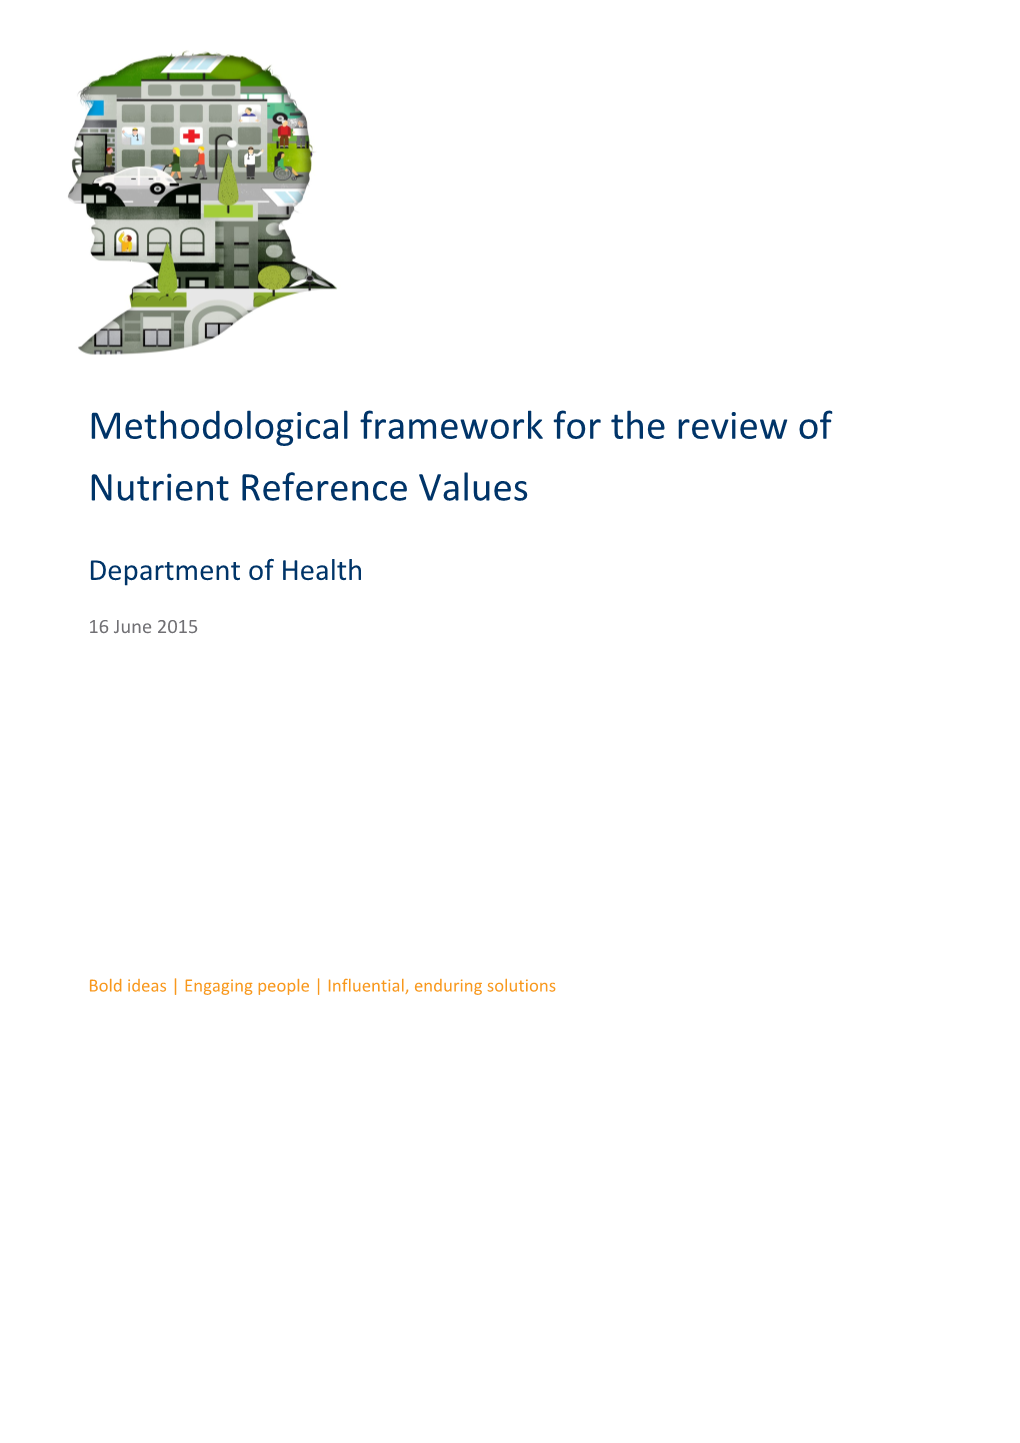 Methodological Framework for the Review of Nutrient Reference Values